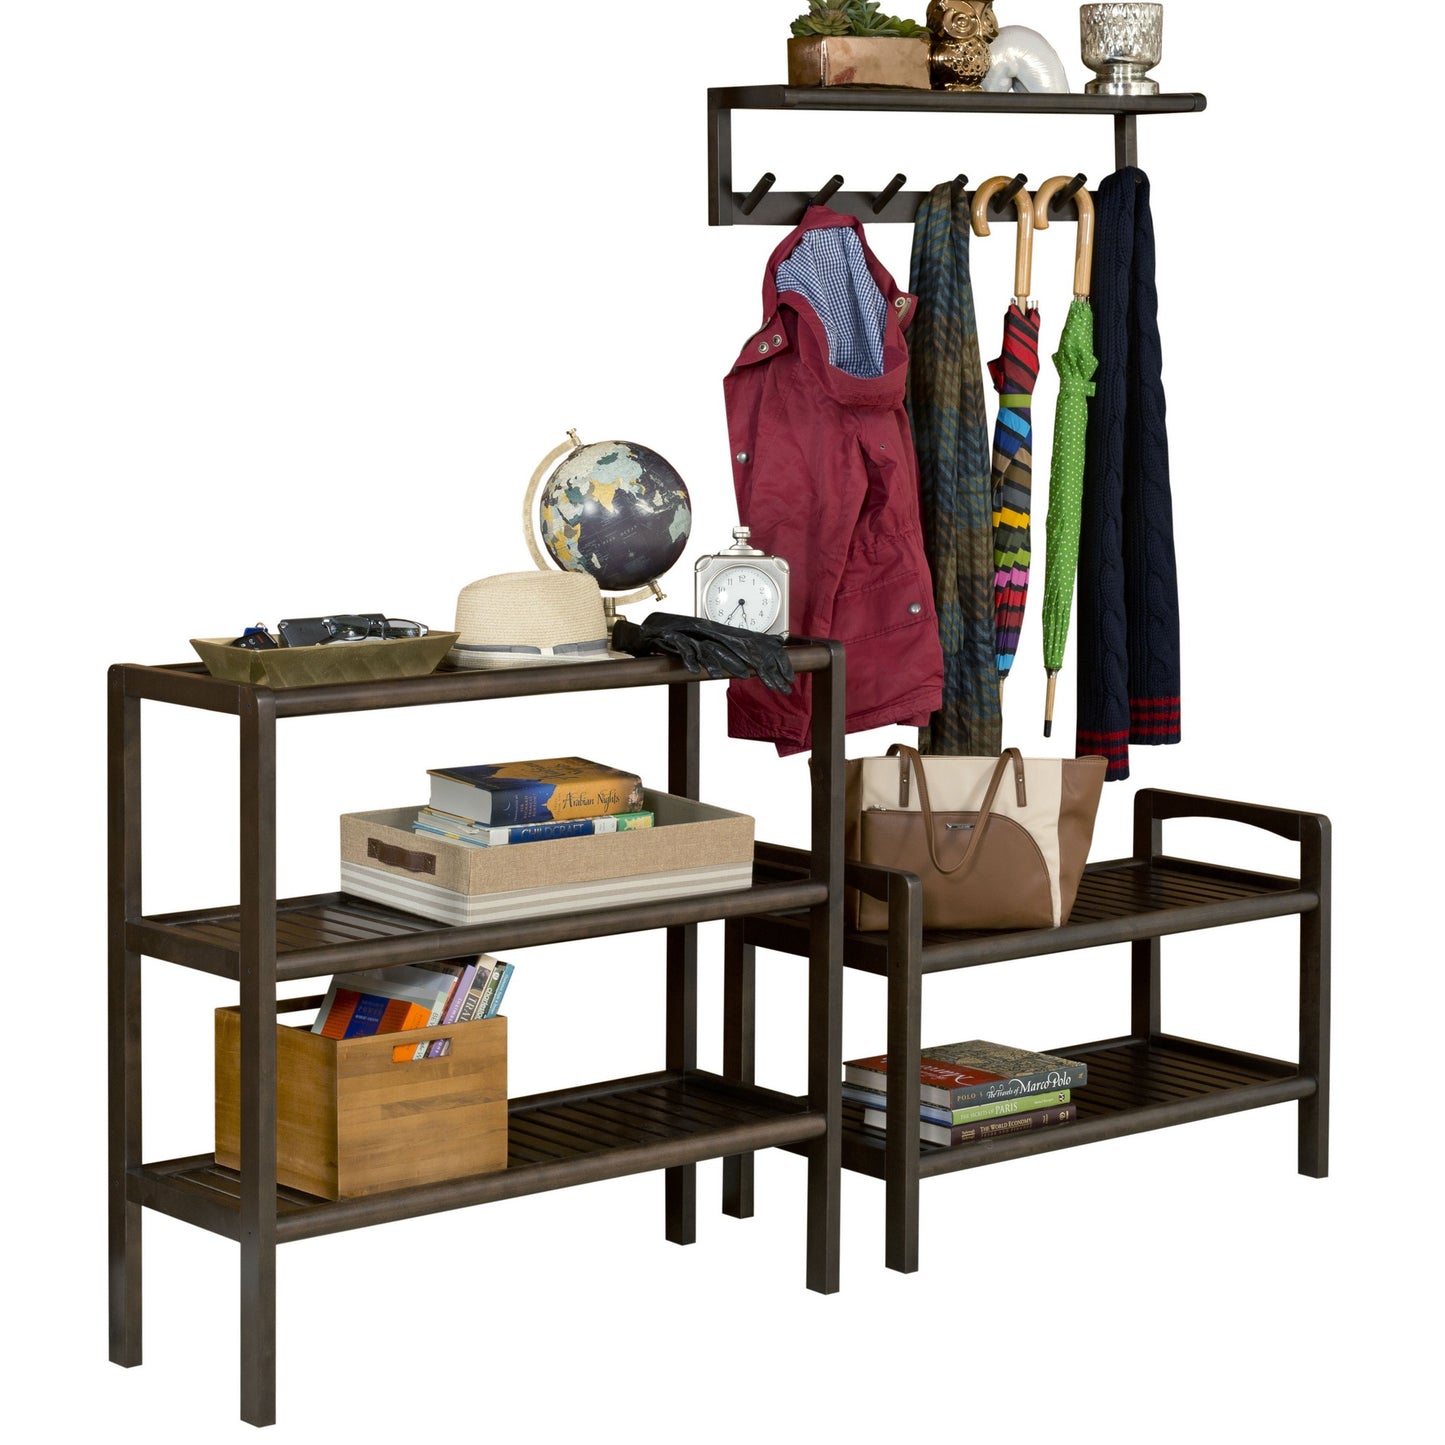 8" Wooden Wallmounted Large Peg Rack with Shelf in Espresso